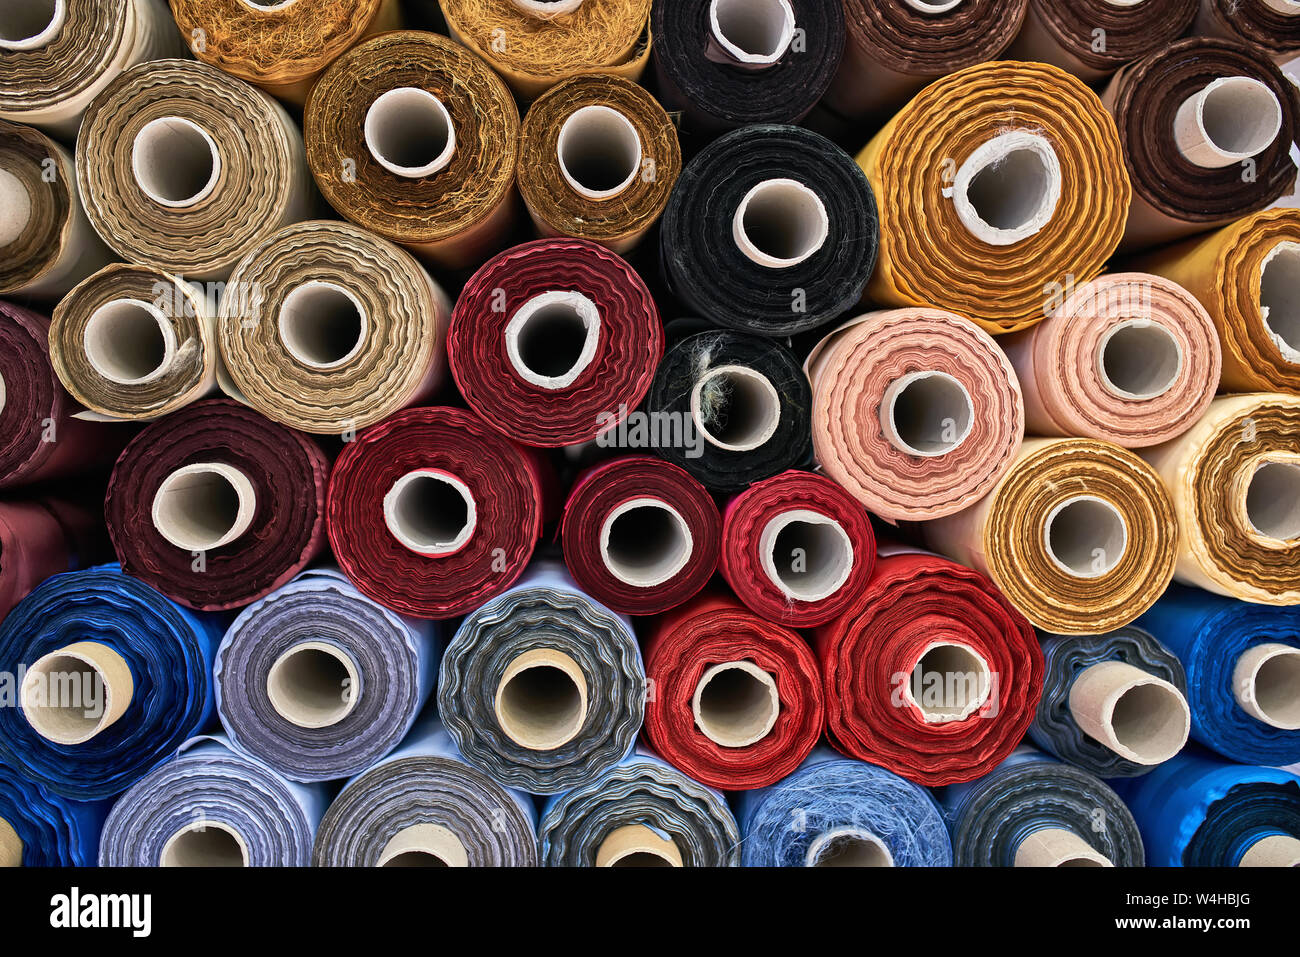 Fabric warehouse with many multicolored textile rolls Stock Photo